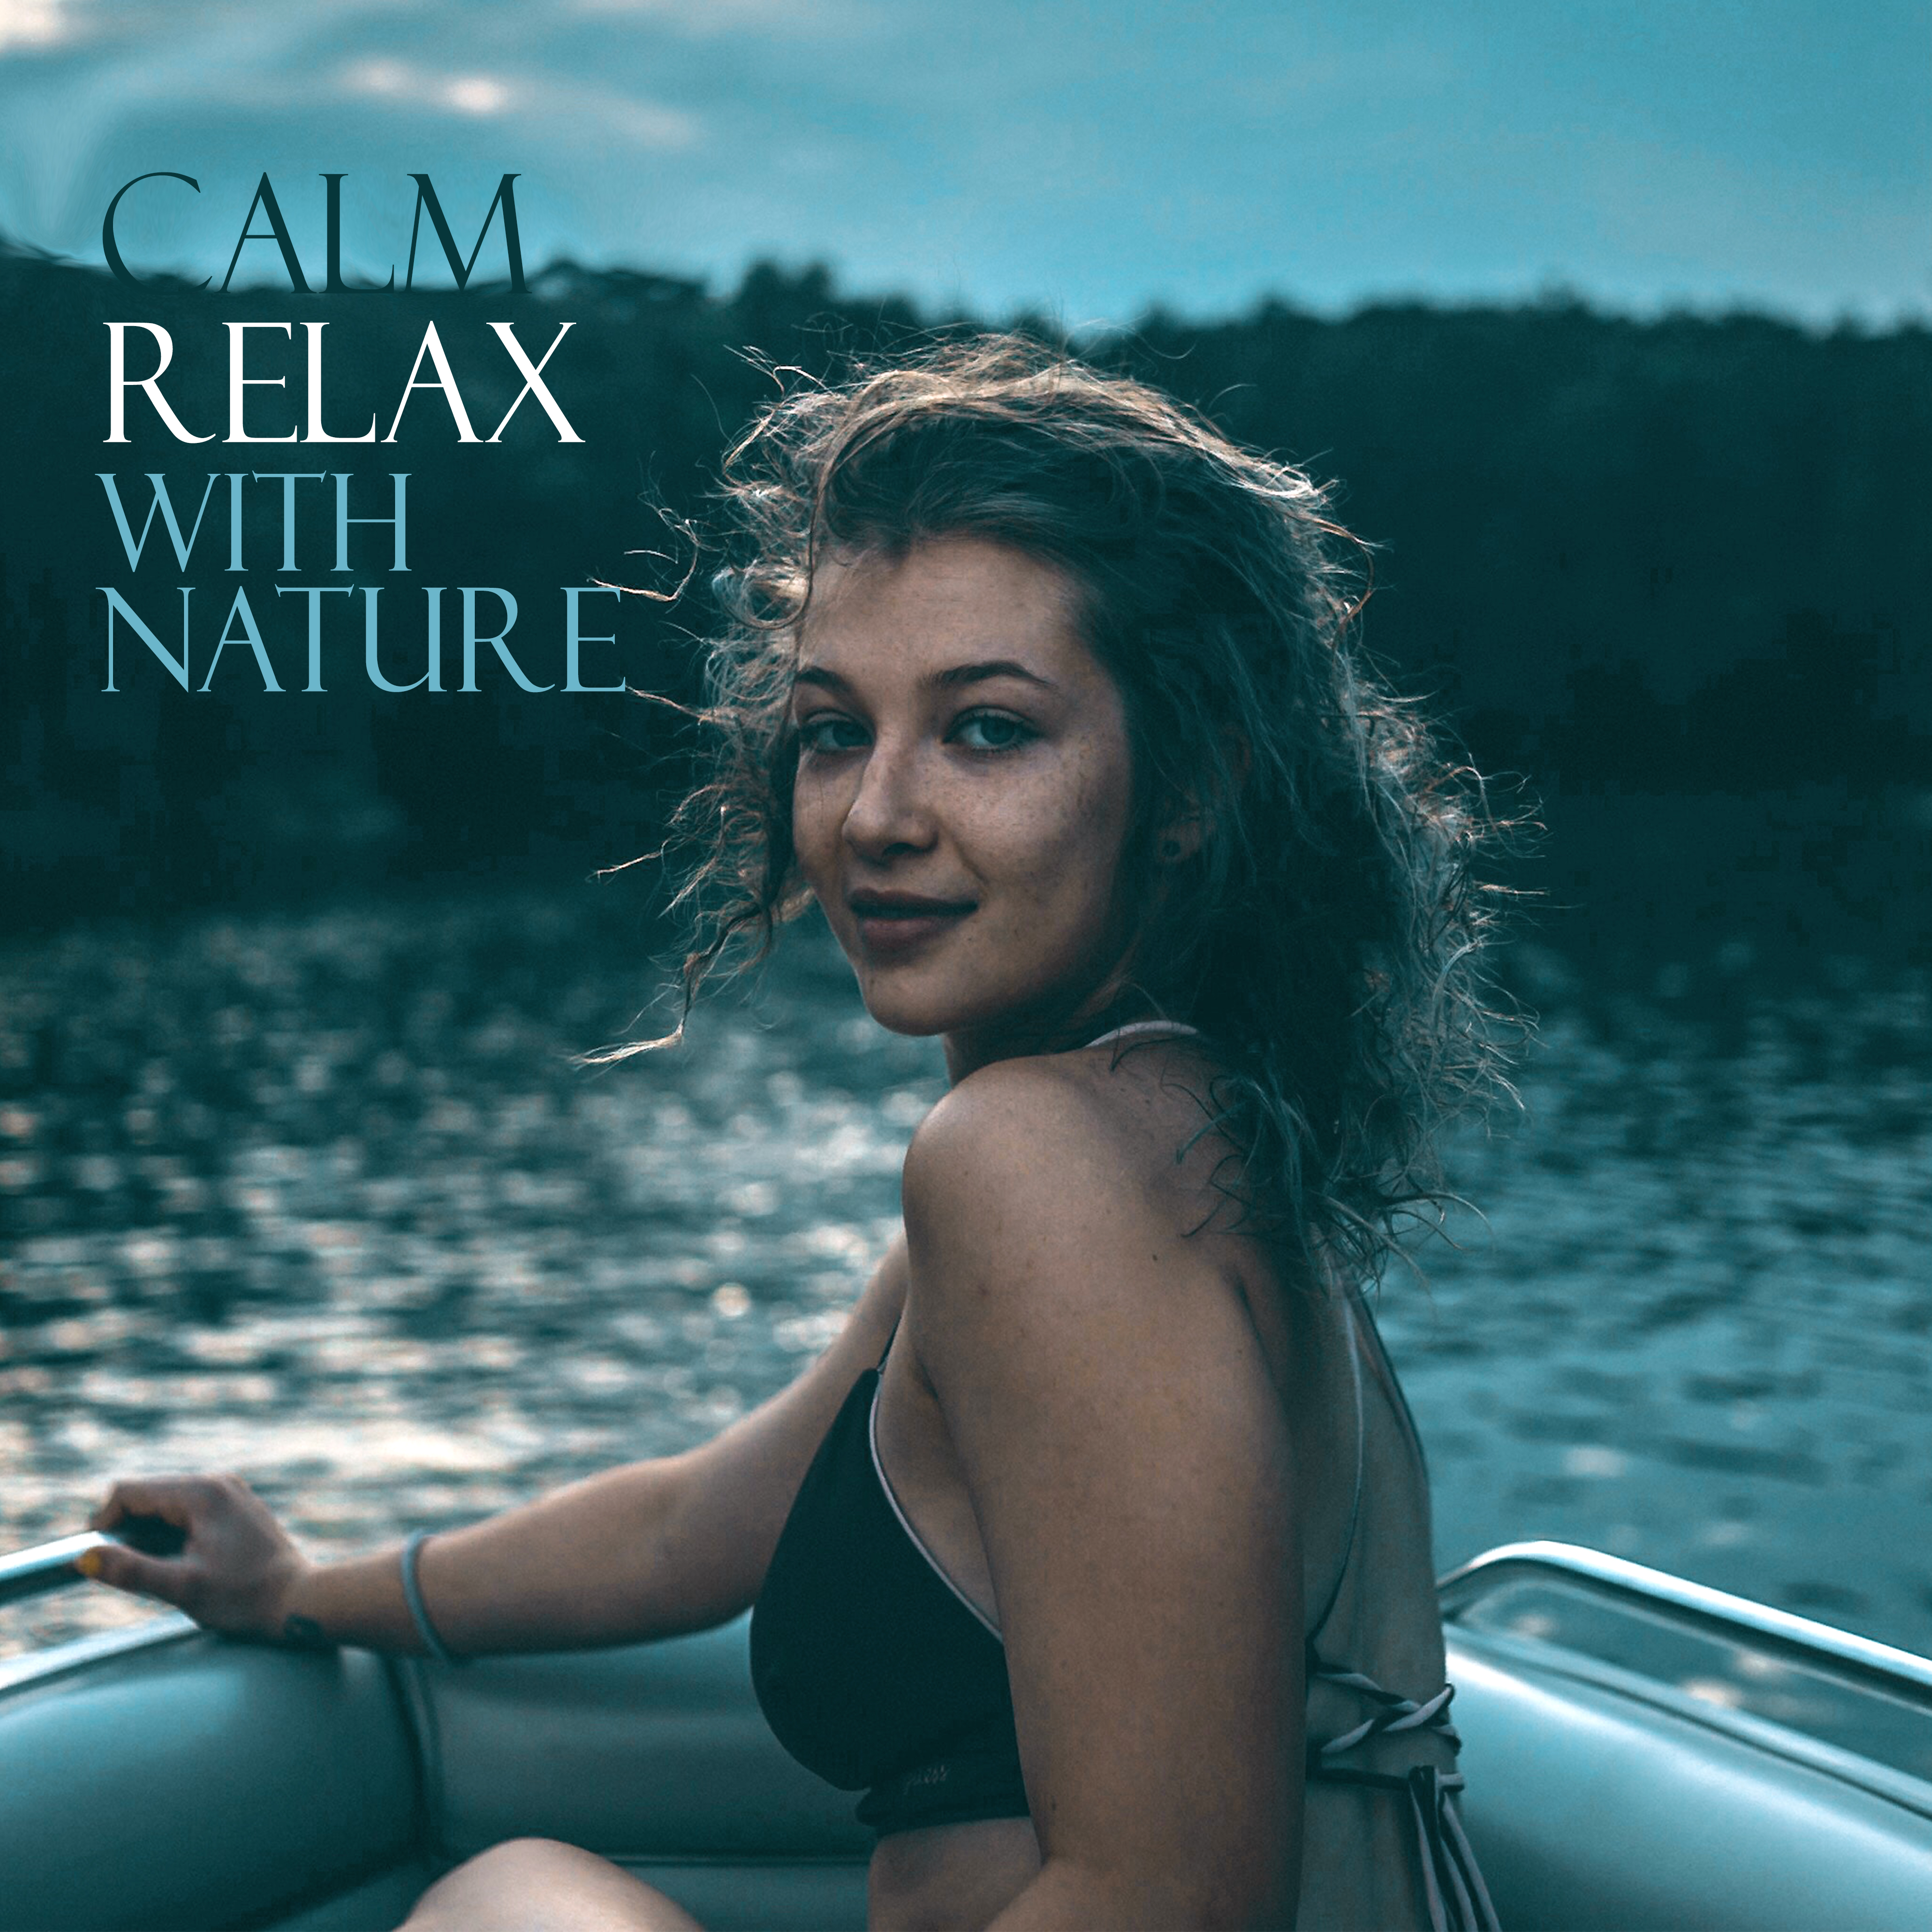 Calm Relax with Nature